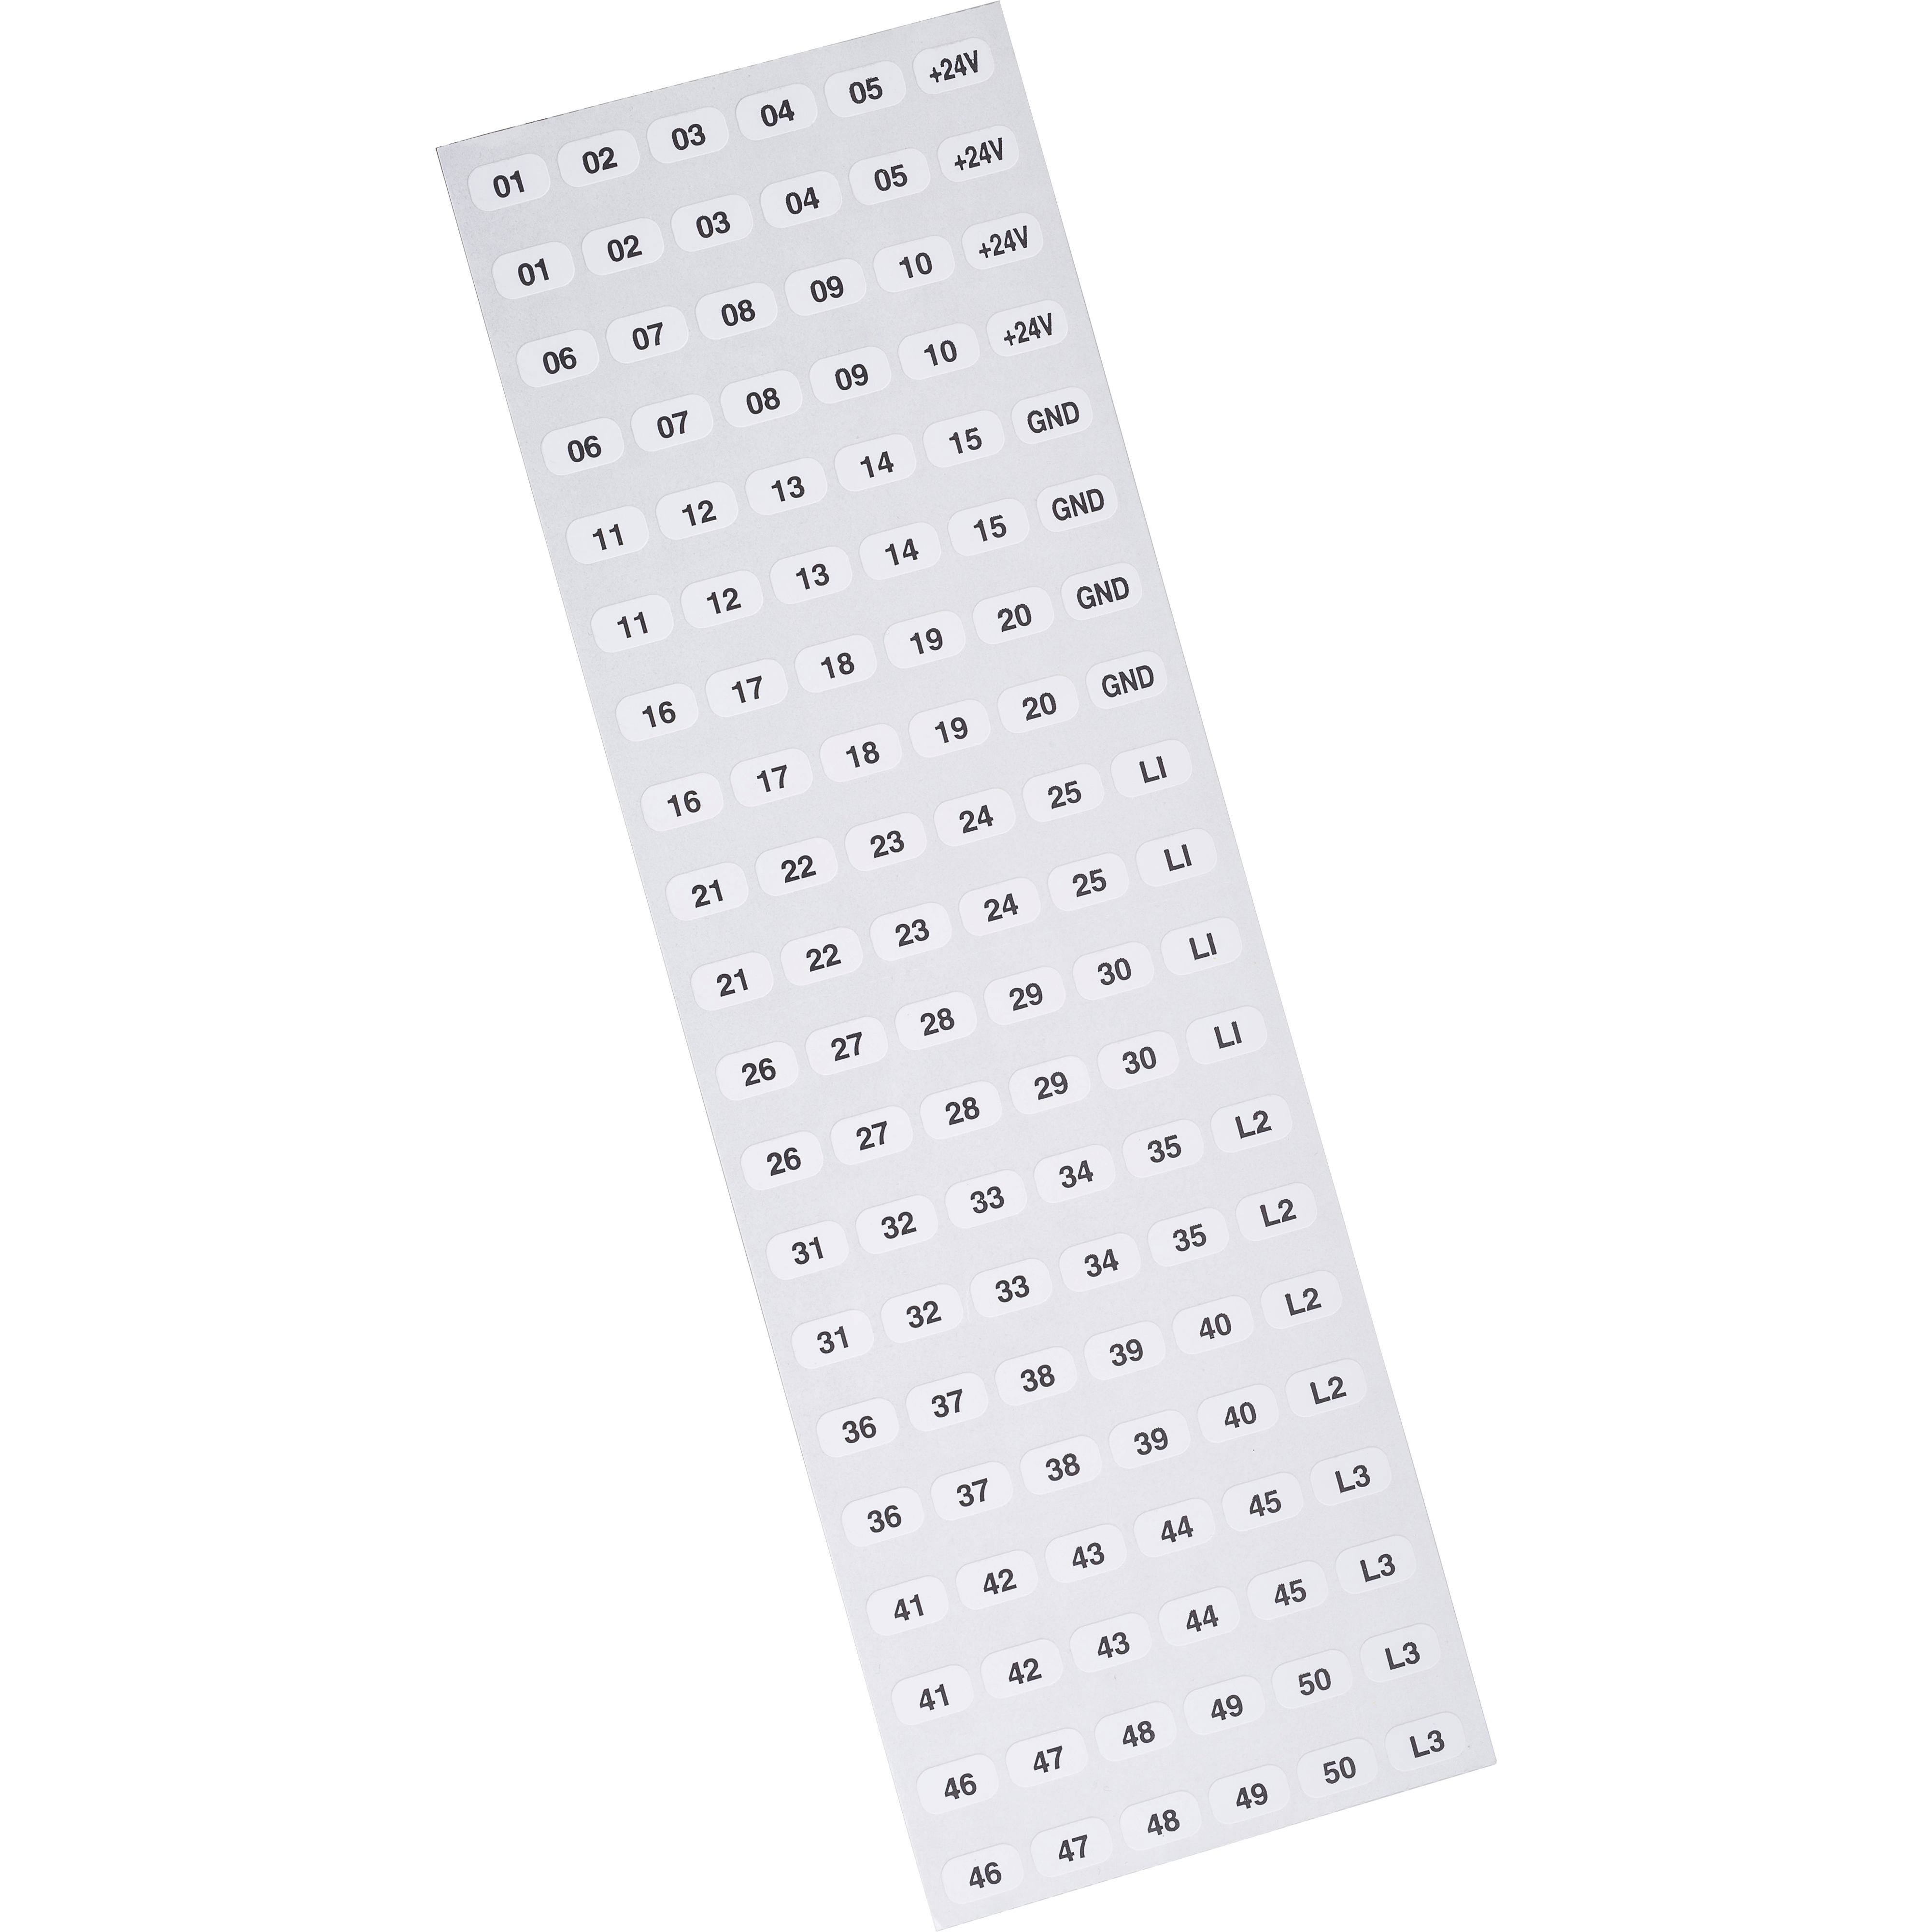 Terminal block, Linergy, marking tabs, numbered 1 to 50, for 9080GR6, 9080GD6 or 9080GT6 terminal blocks